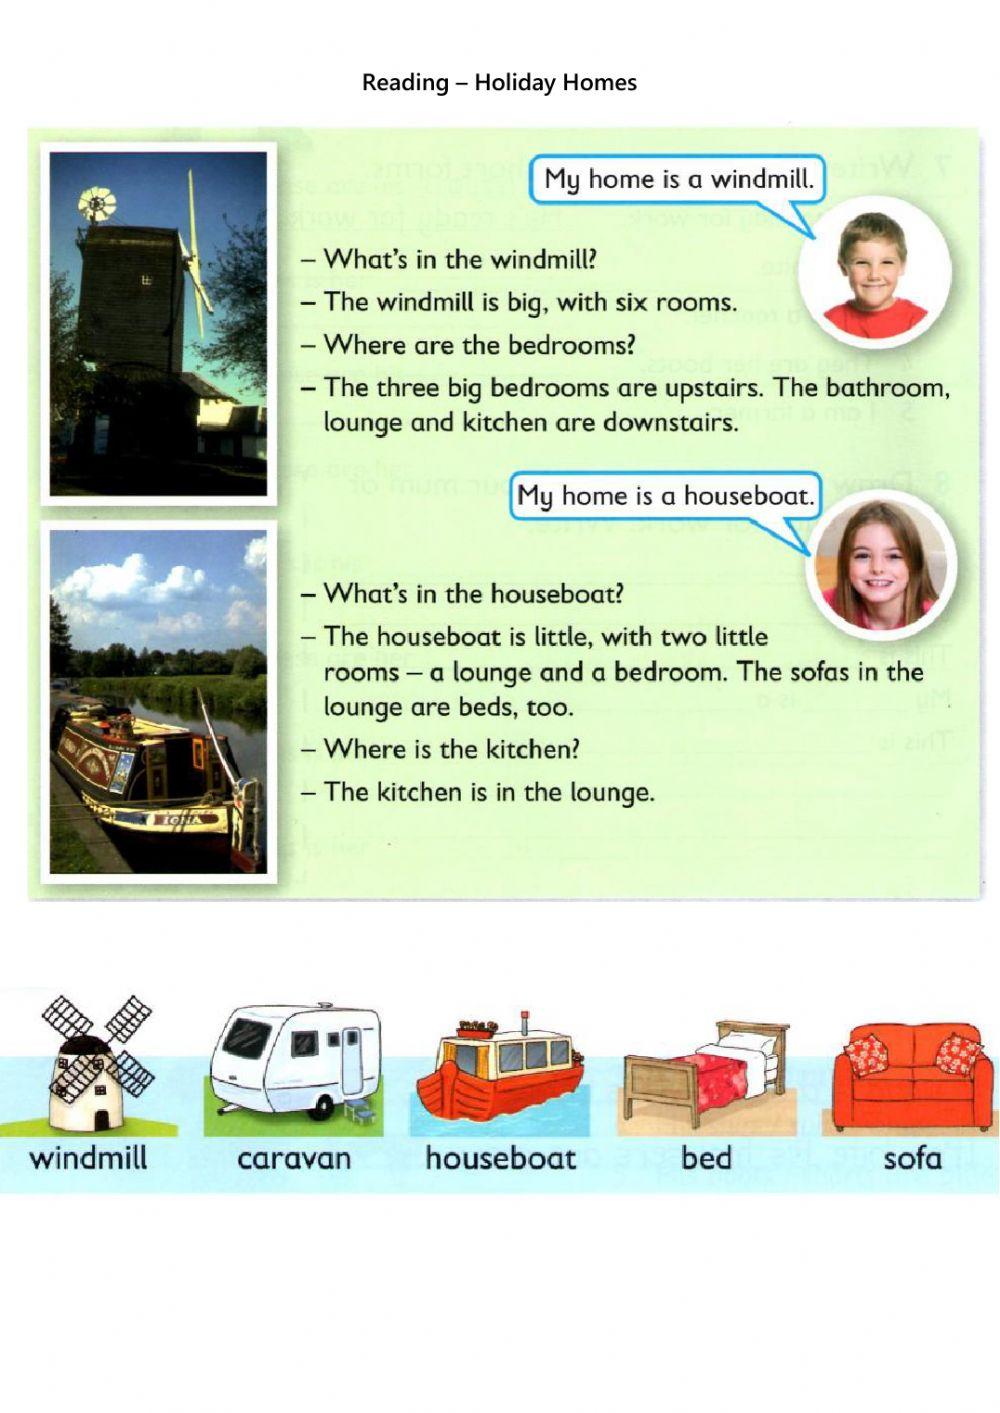 Reading - Holiday Homes (rooms)